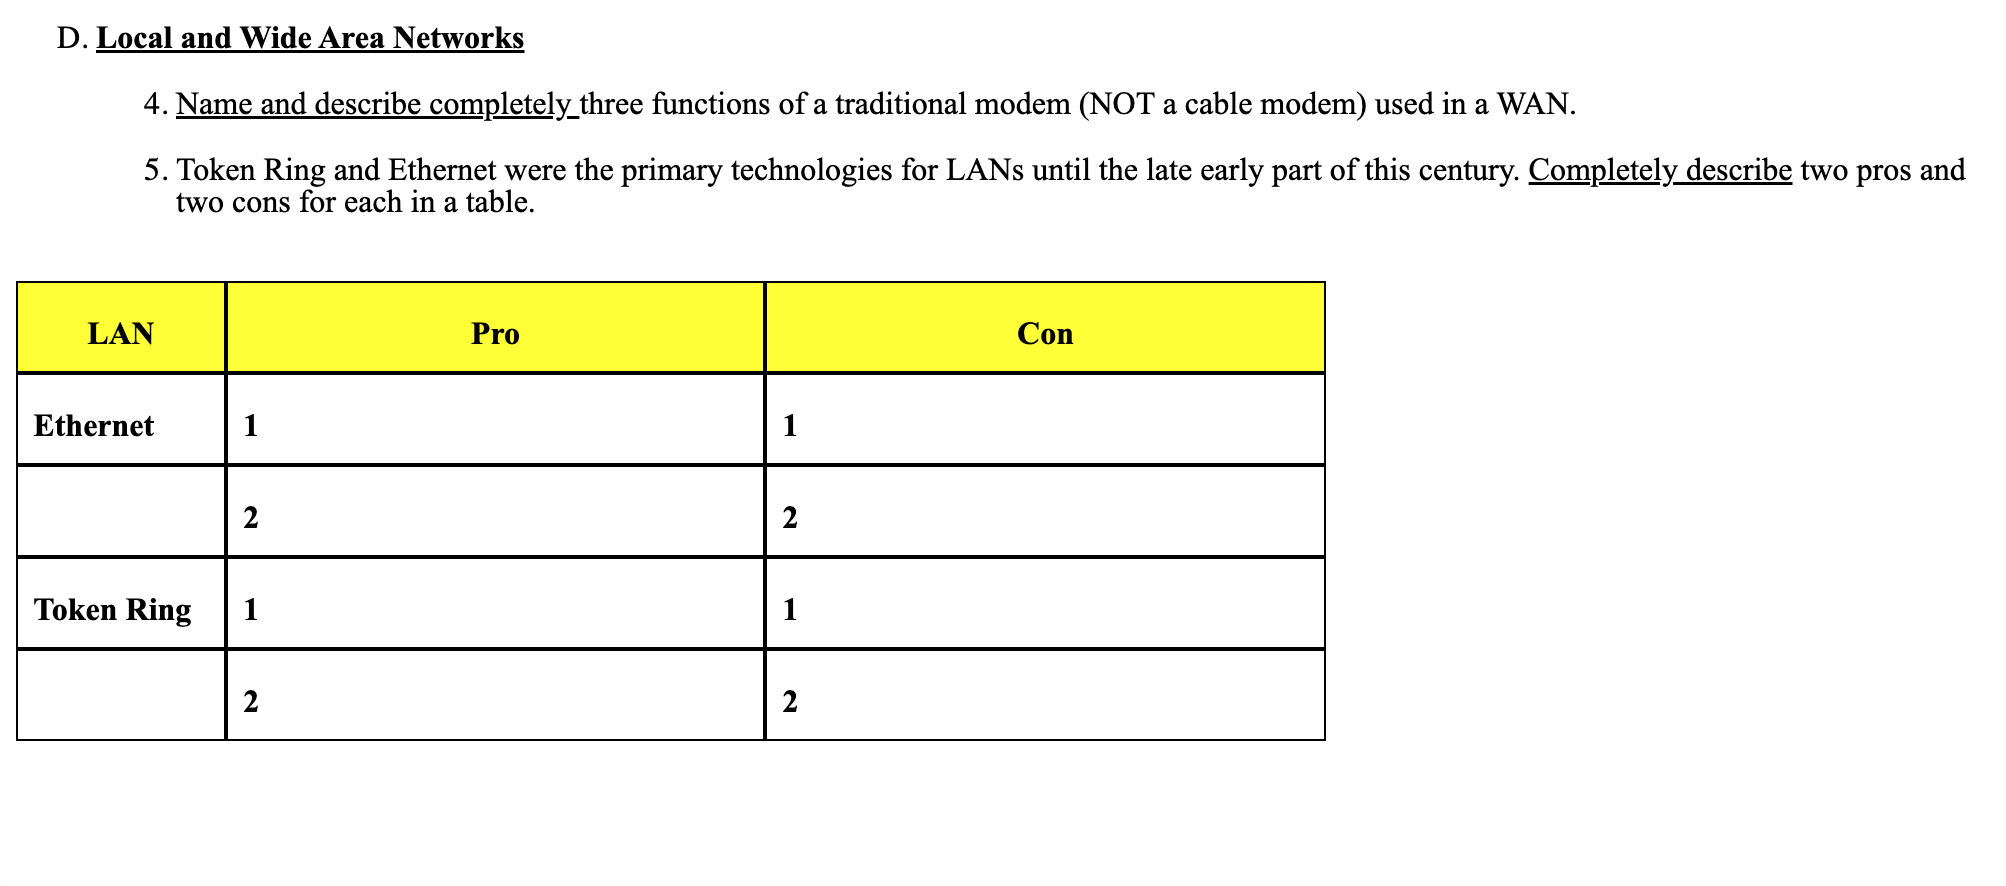 D. Local and Wide Area Networks 4. Name and describe completely_three functions of a traditional modem (NOT a